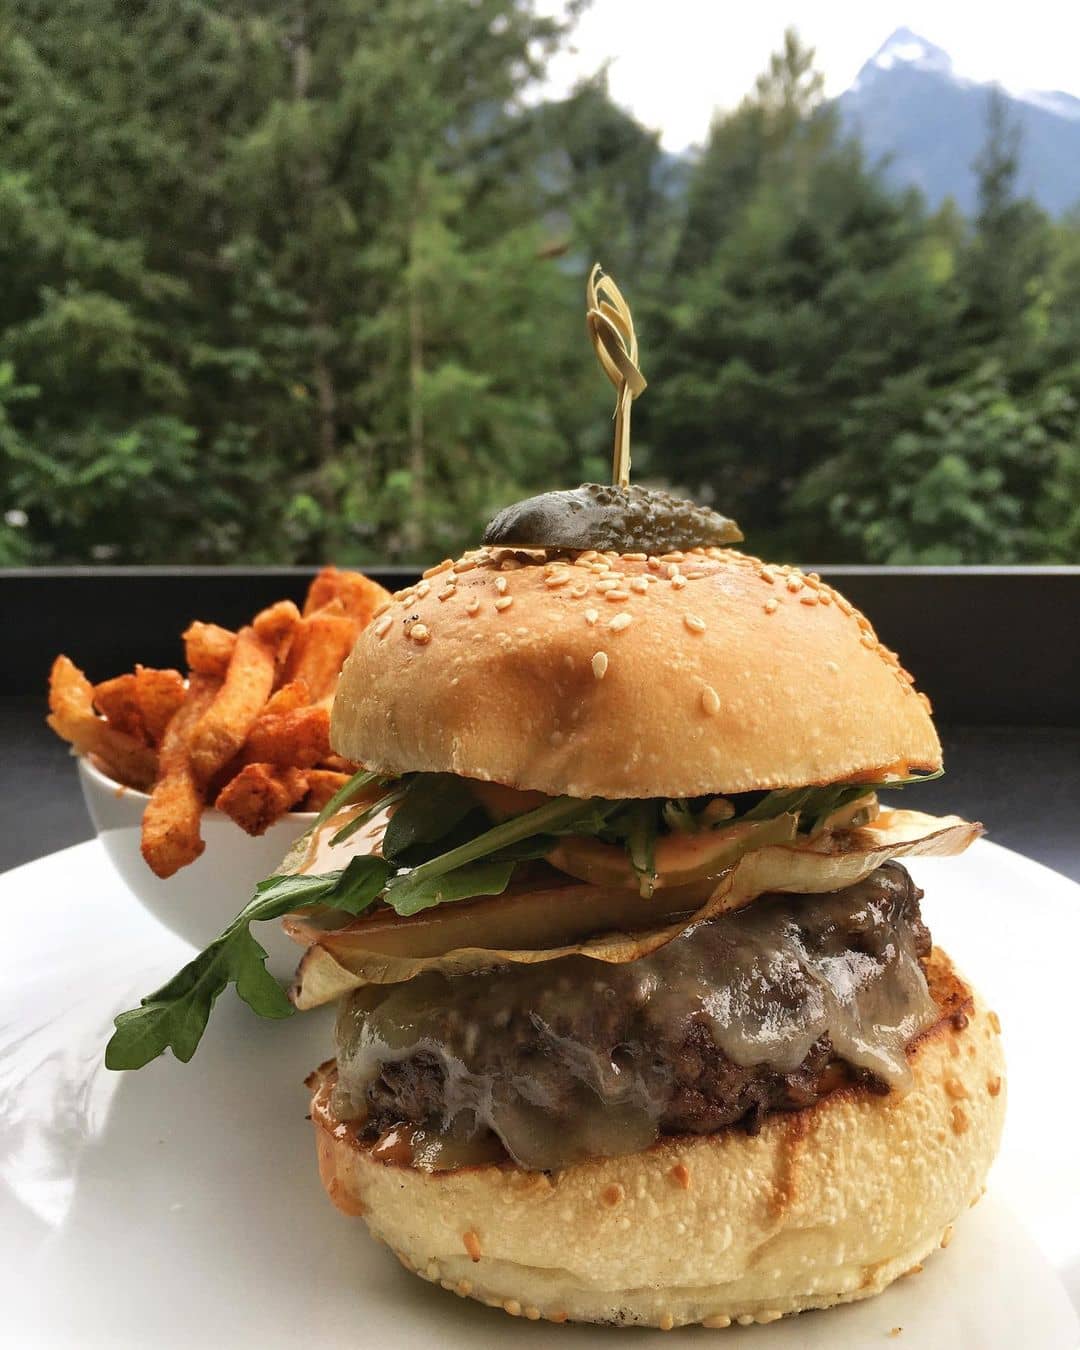 Sea to Sky Highway Guide - Fergie's cafe burger and mountain view